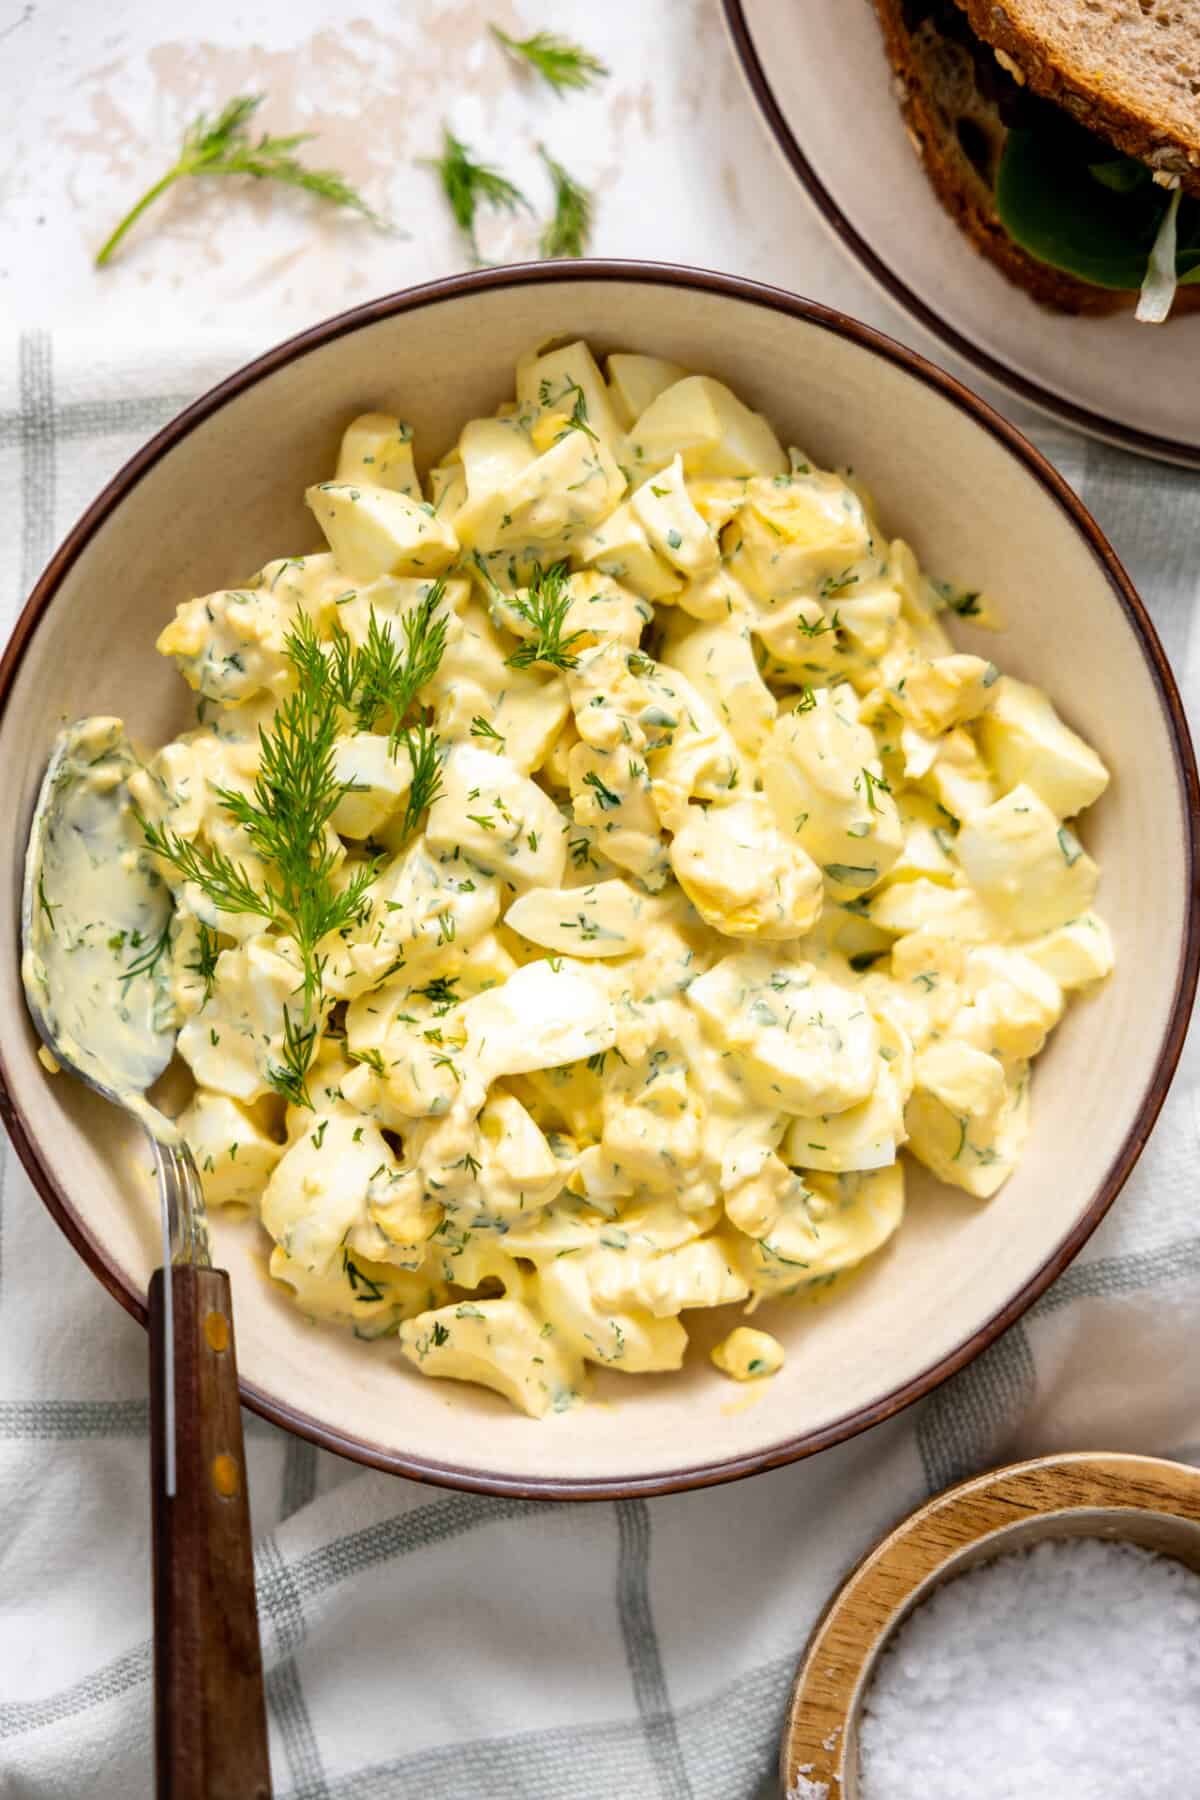 Bowl of egg salad topped with fresh herbs.